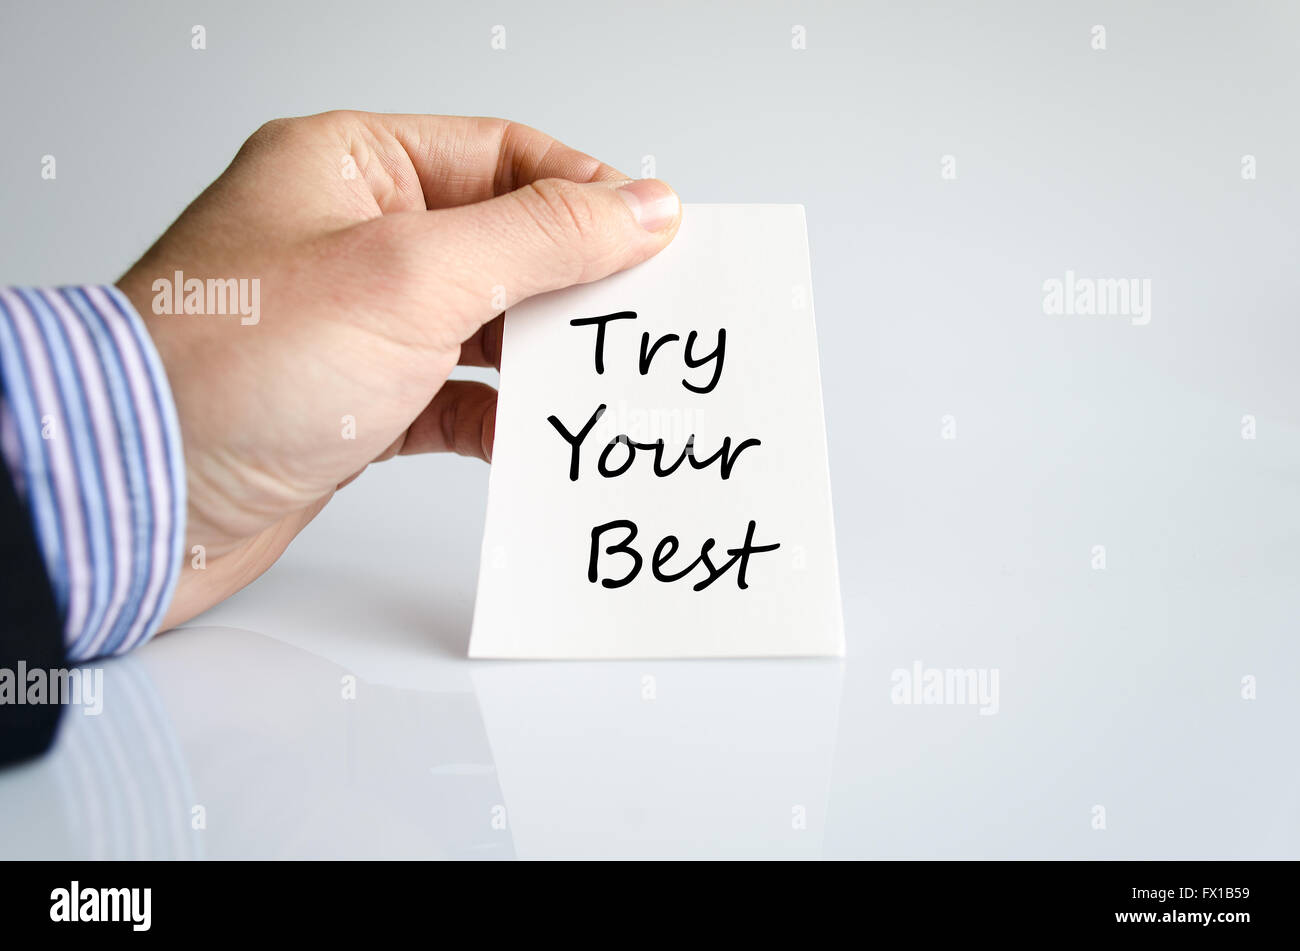 Try your best text concept isolated over white background Stock Photo